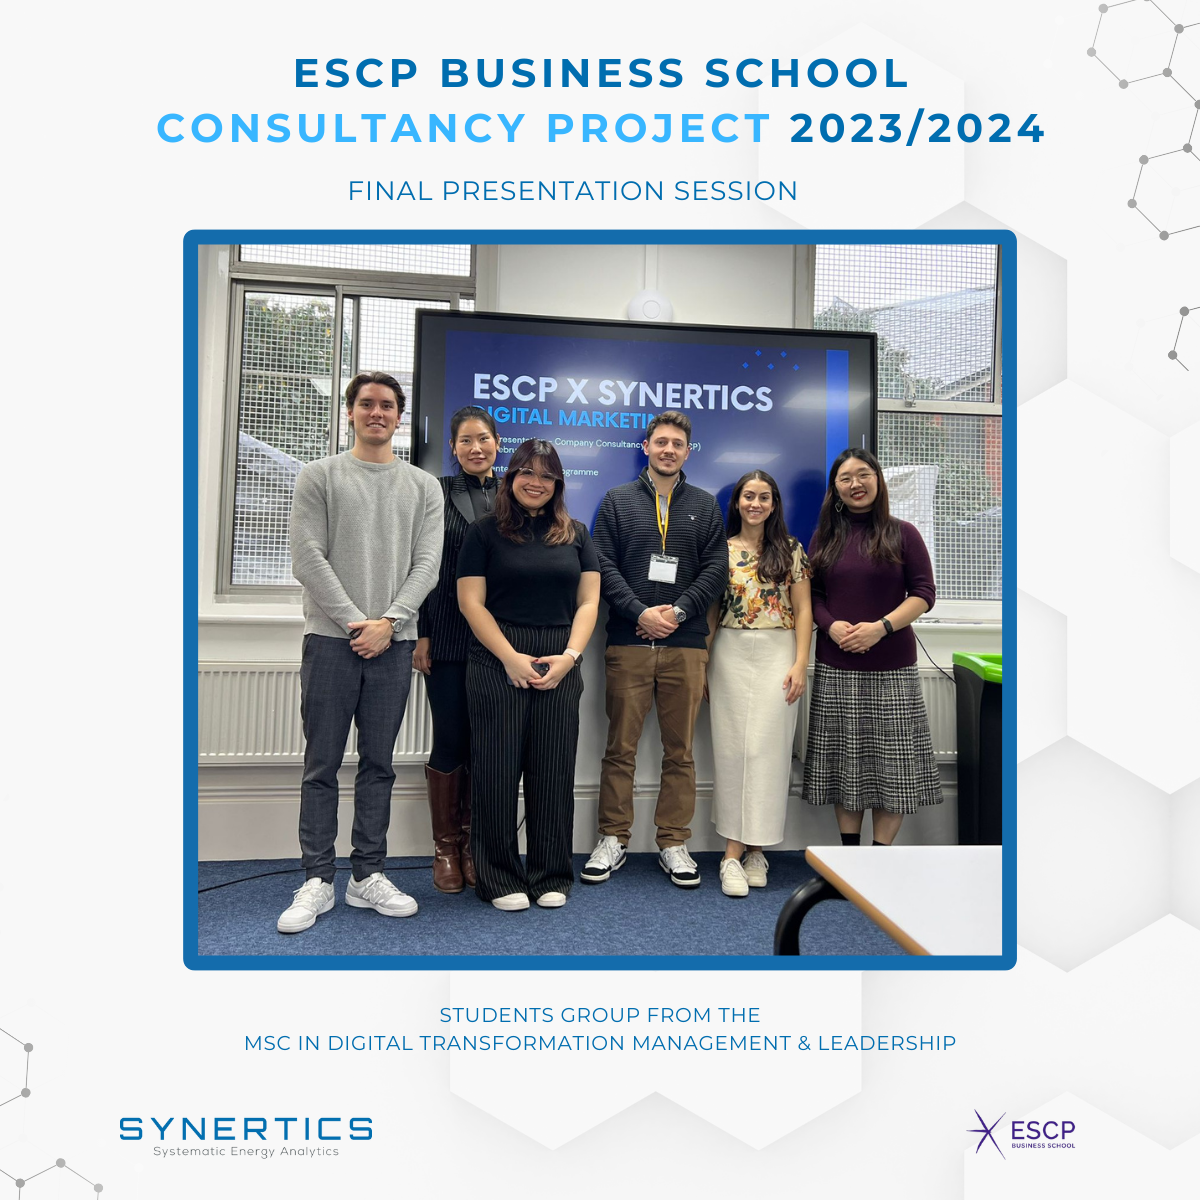 ESCP Business School Consultancy Project - Digital Marketing with Synertics